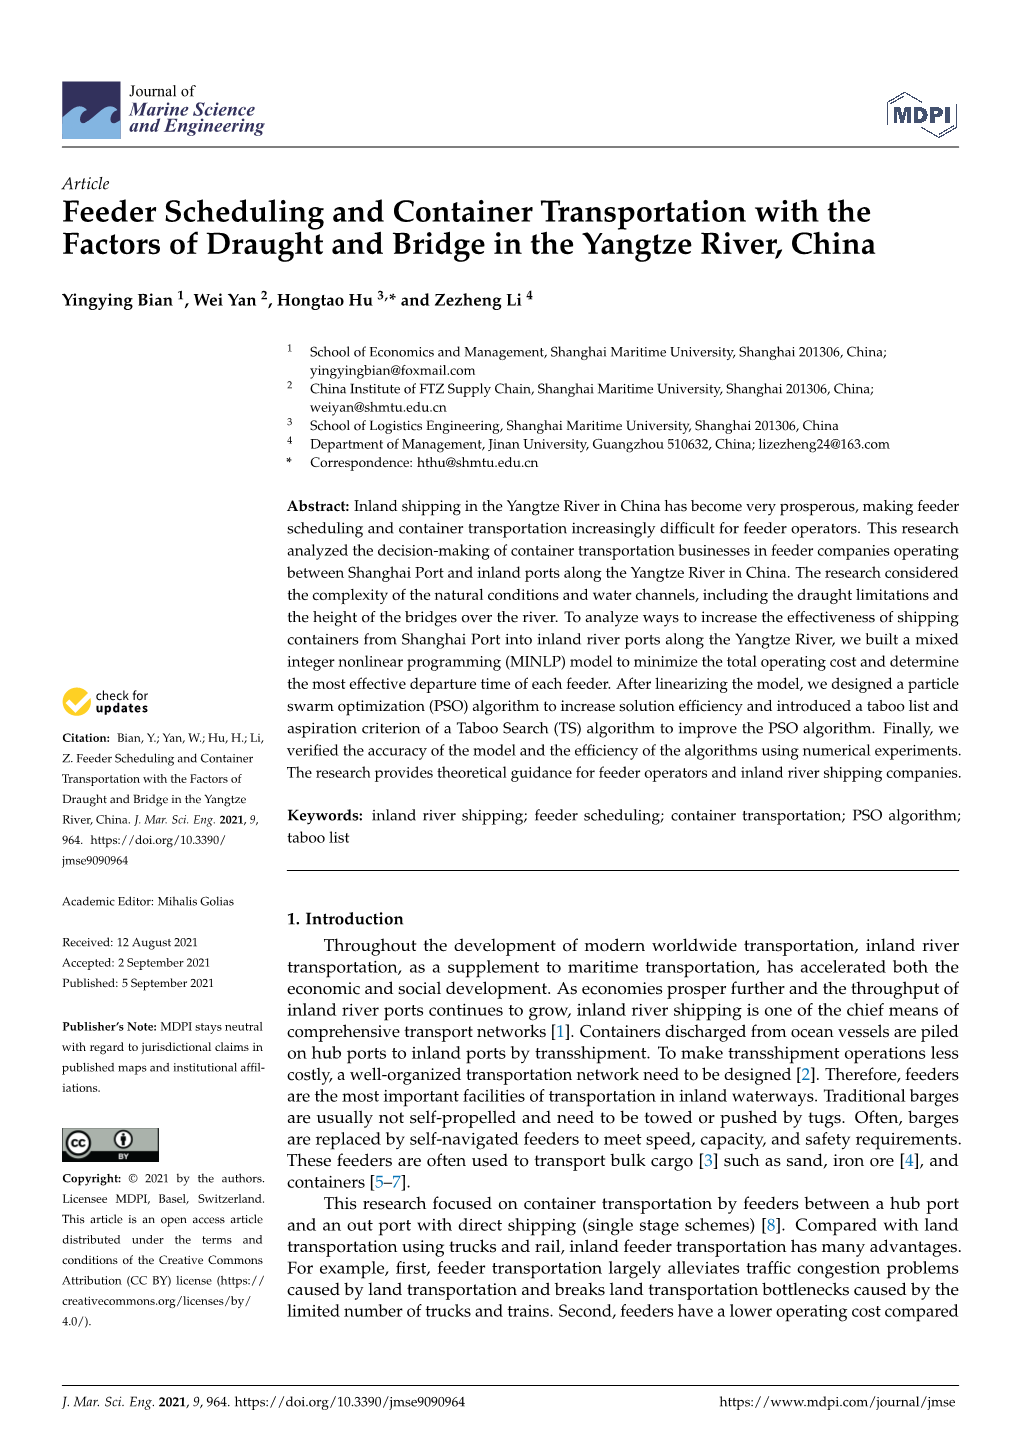 Feeder Scheduling and Container Transportation with the Factors of Draught and Bridge in the Yangtze River, China